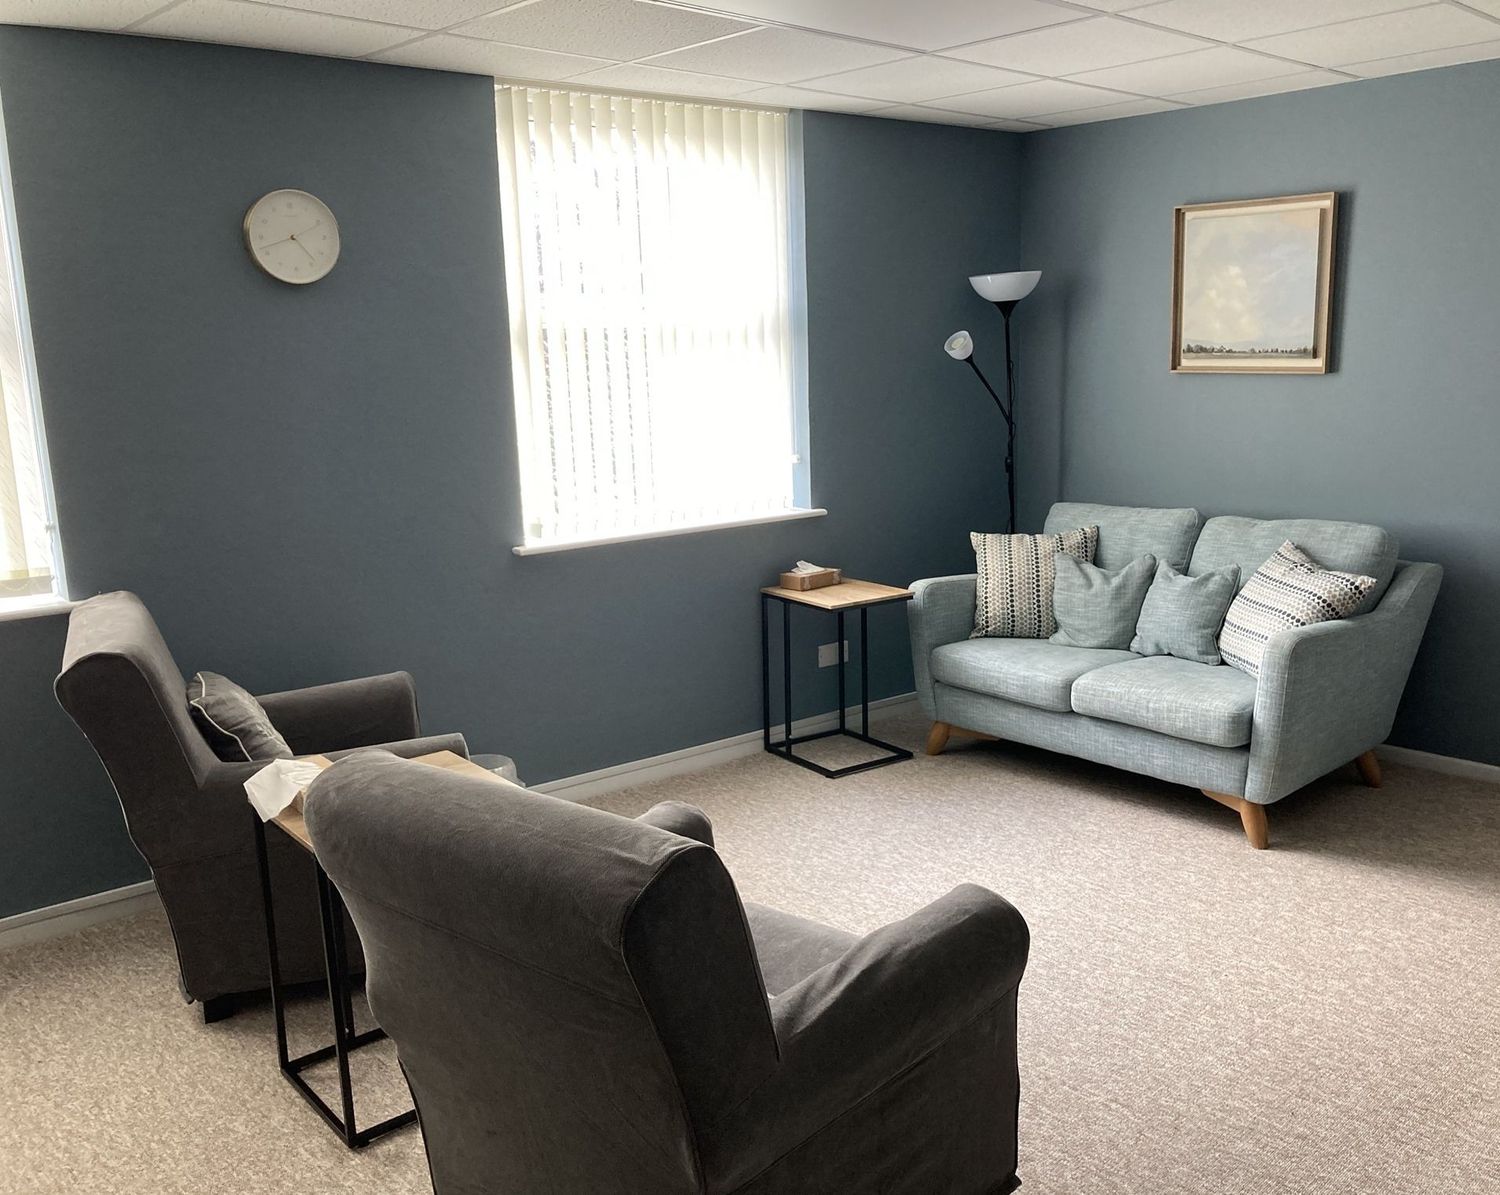 Gallery Photo of Comfortable, spacious room in Melksham town centre. 